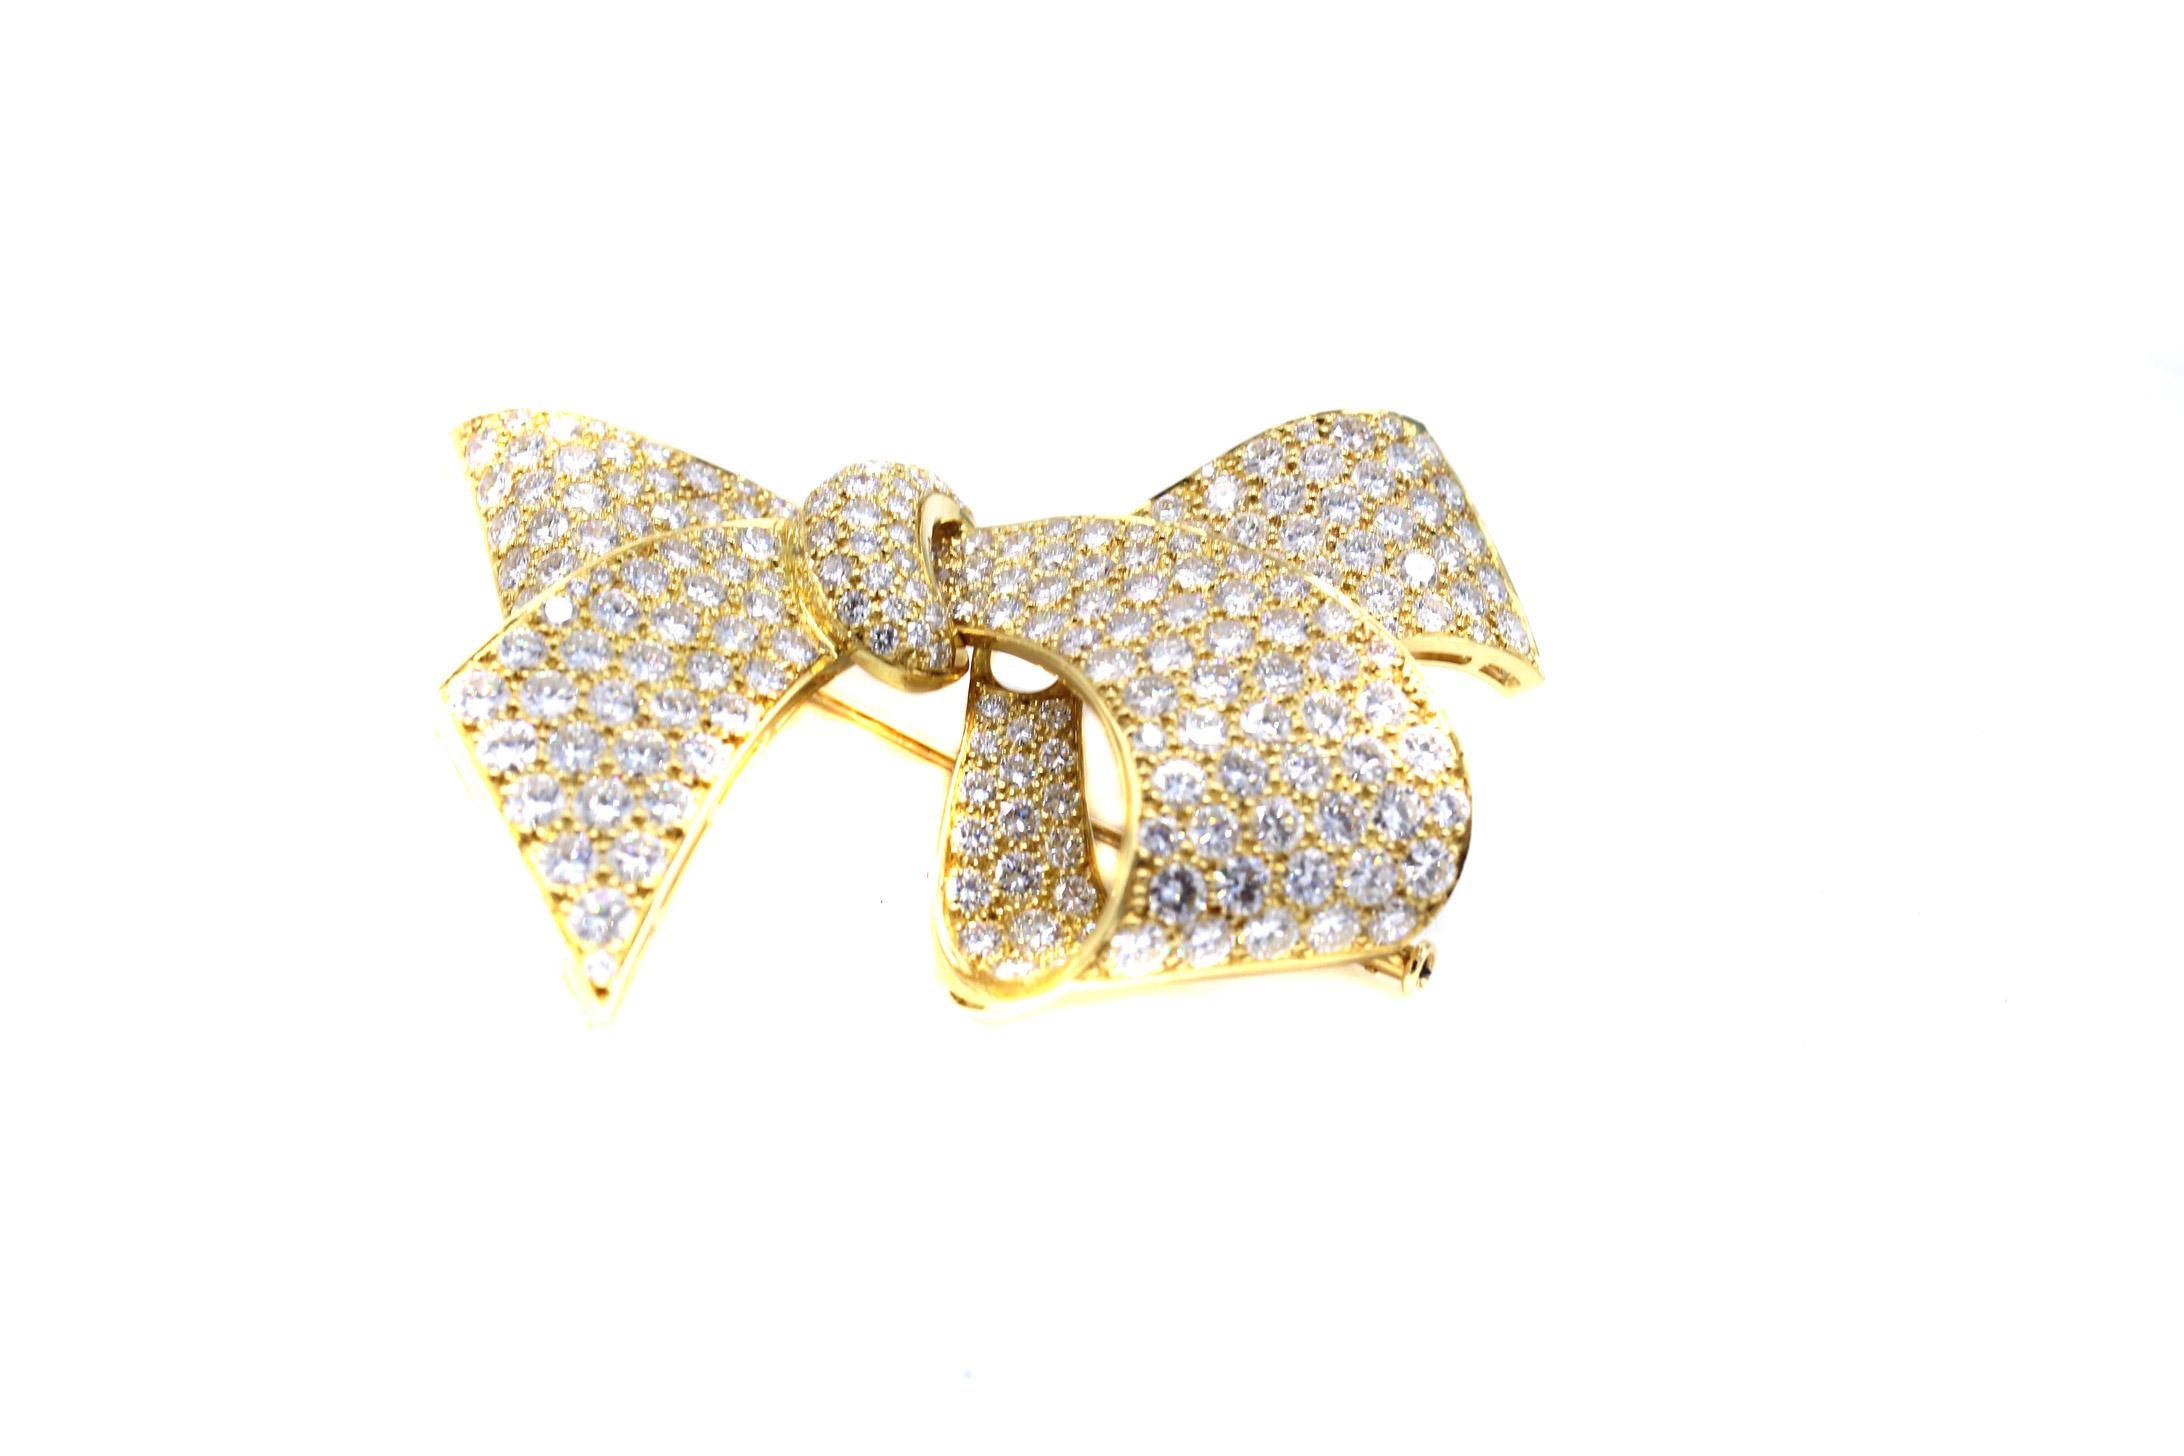 This stunning three-dimensional bow brooch has been masterfully handcrafted in 18-karat yellow gold, with each element of the bow curving to give the maximum fire and sparkle to the diamonds. Over 250 perfectly matched bright white and sparkly round